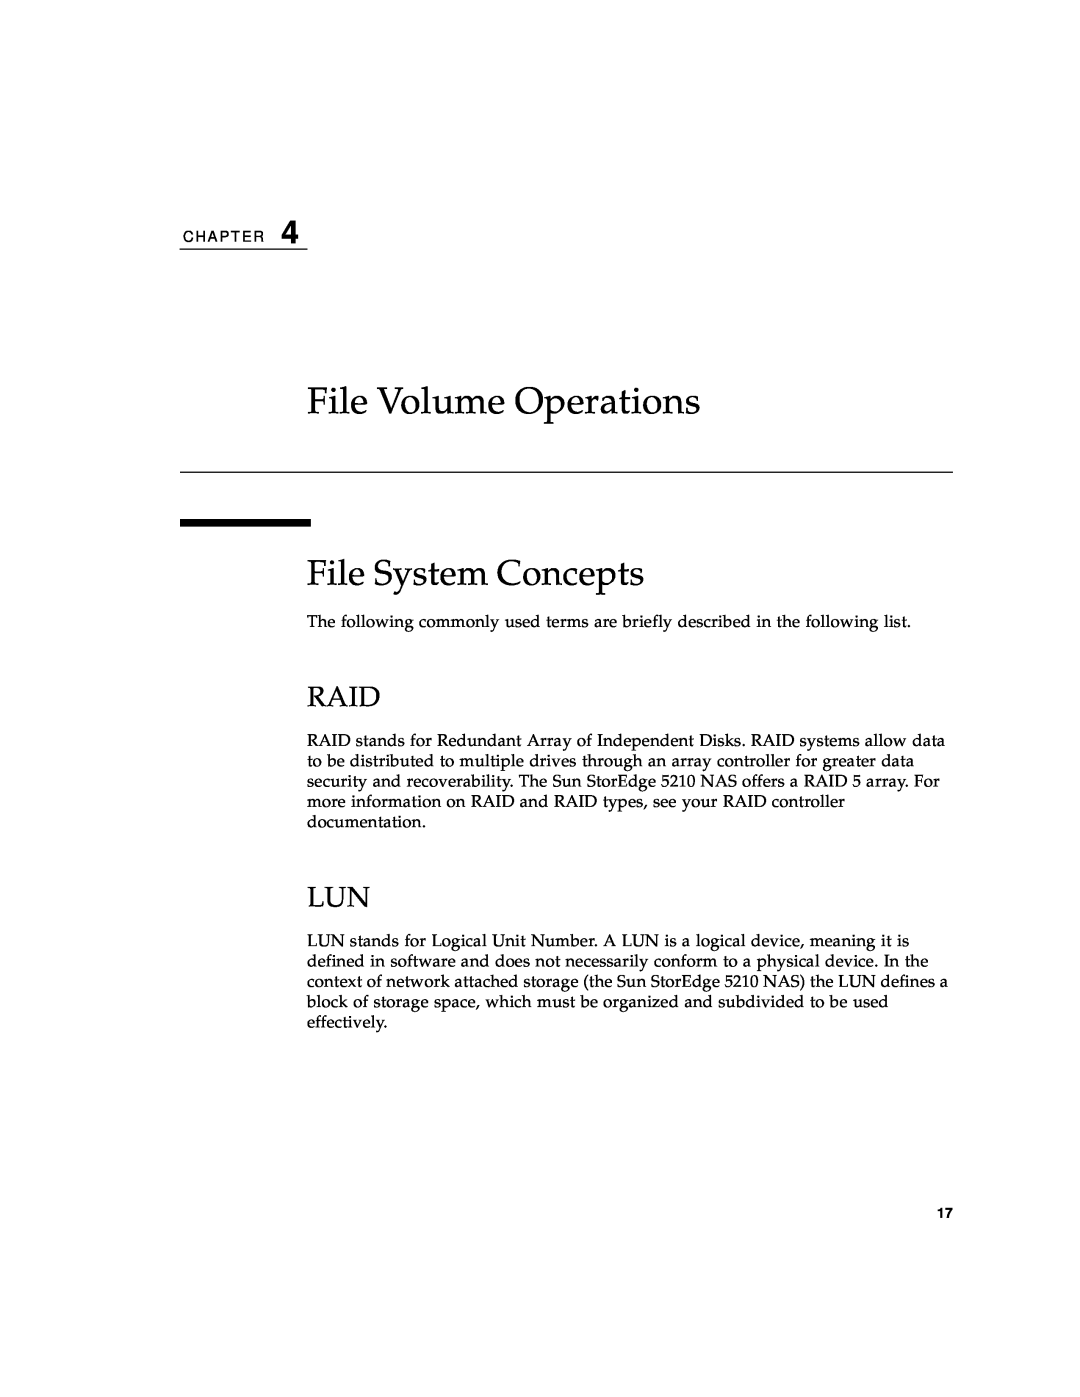 Sun Microsystems 5210 NAS manual File Volume Operations, File System Concepts, Raid 